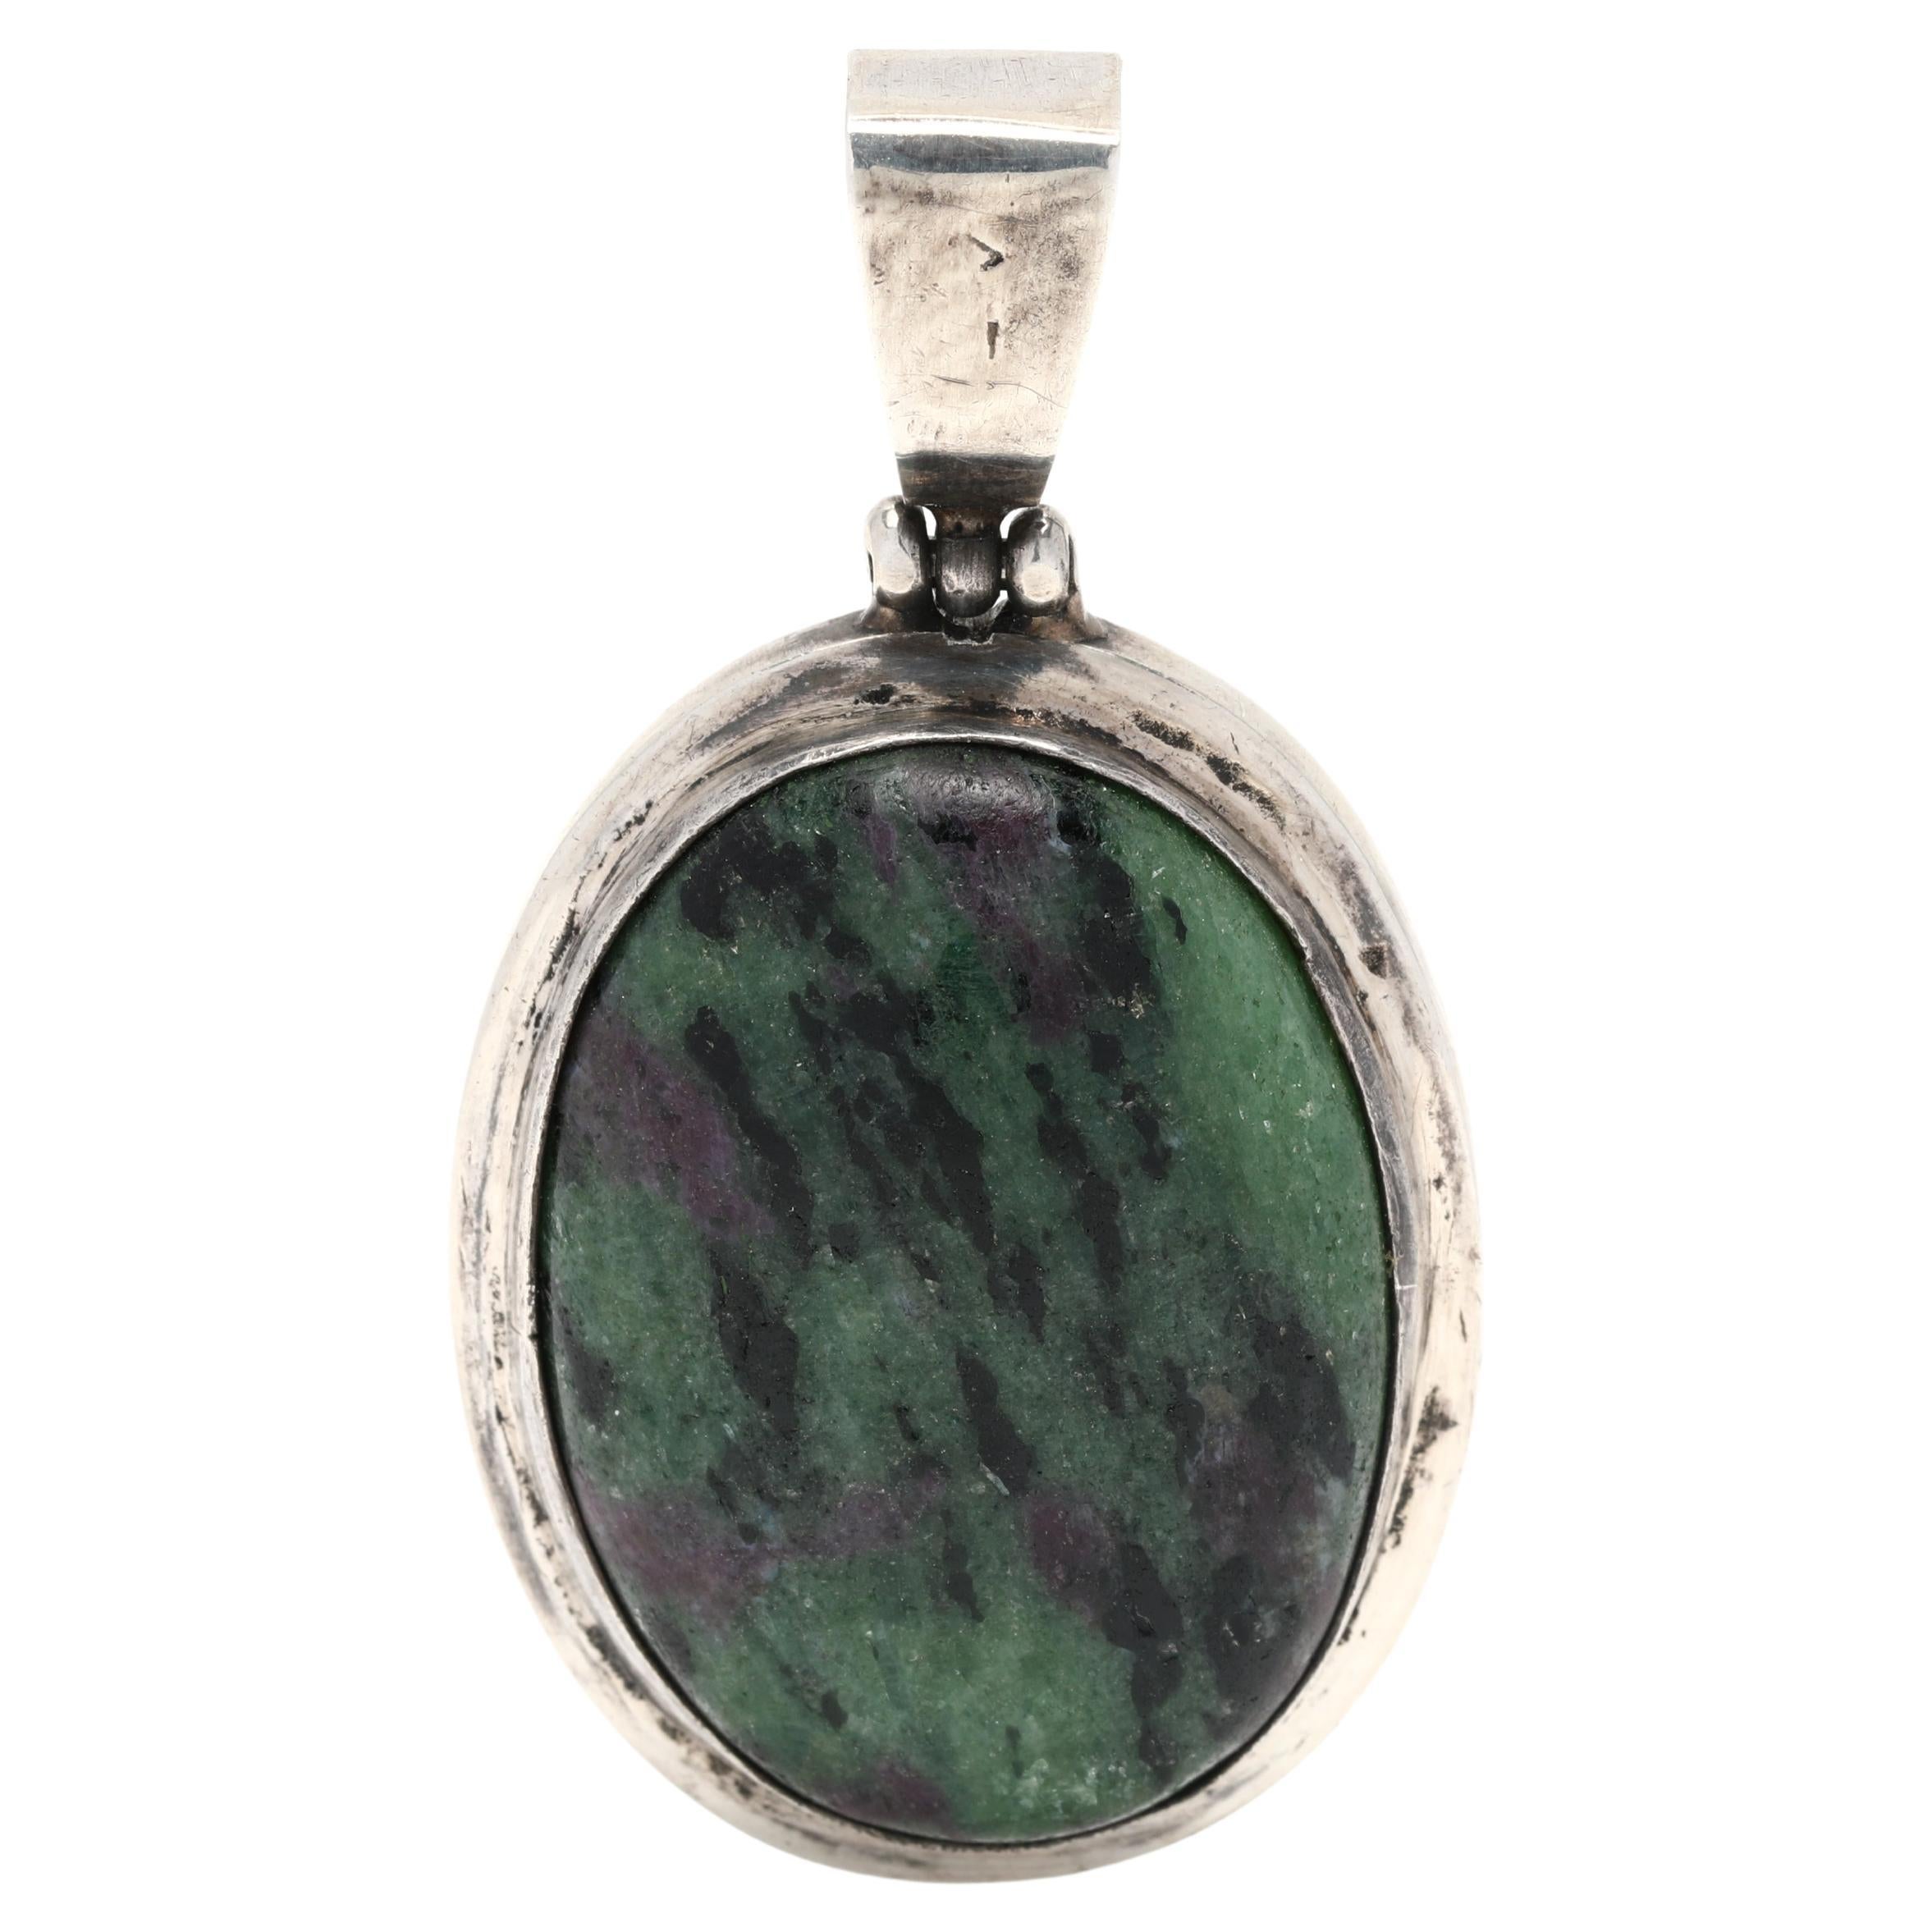 Vintage Large Ruby in Zoisite Pendant, Sterling Silver, Length 2 Inches, Oval